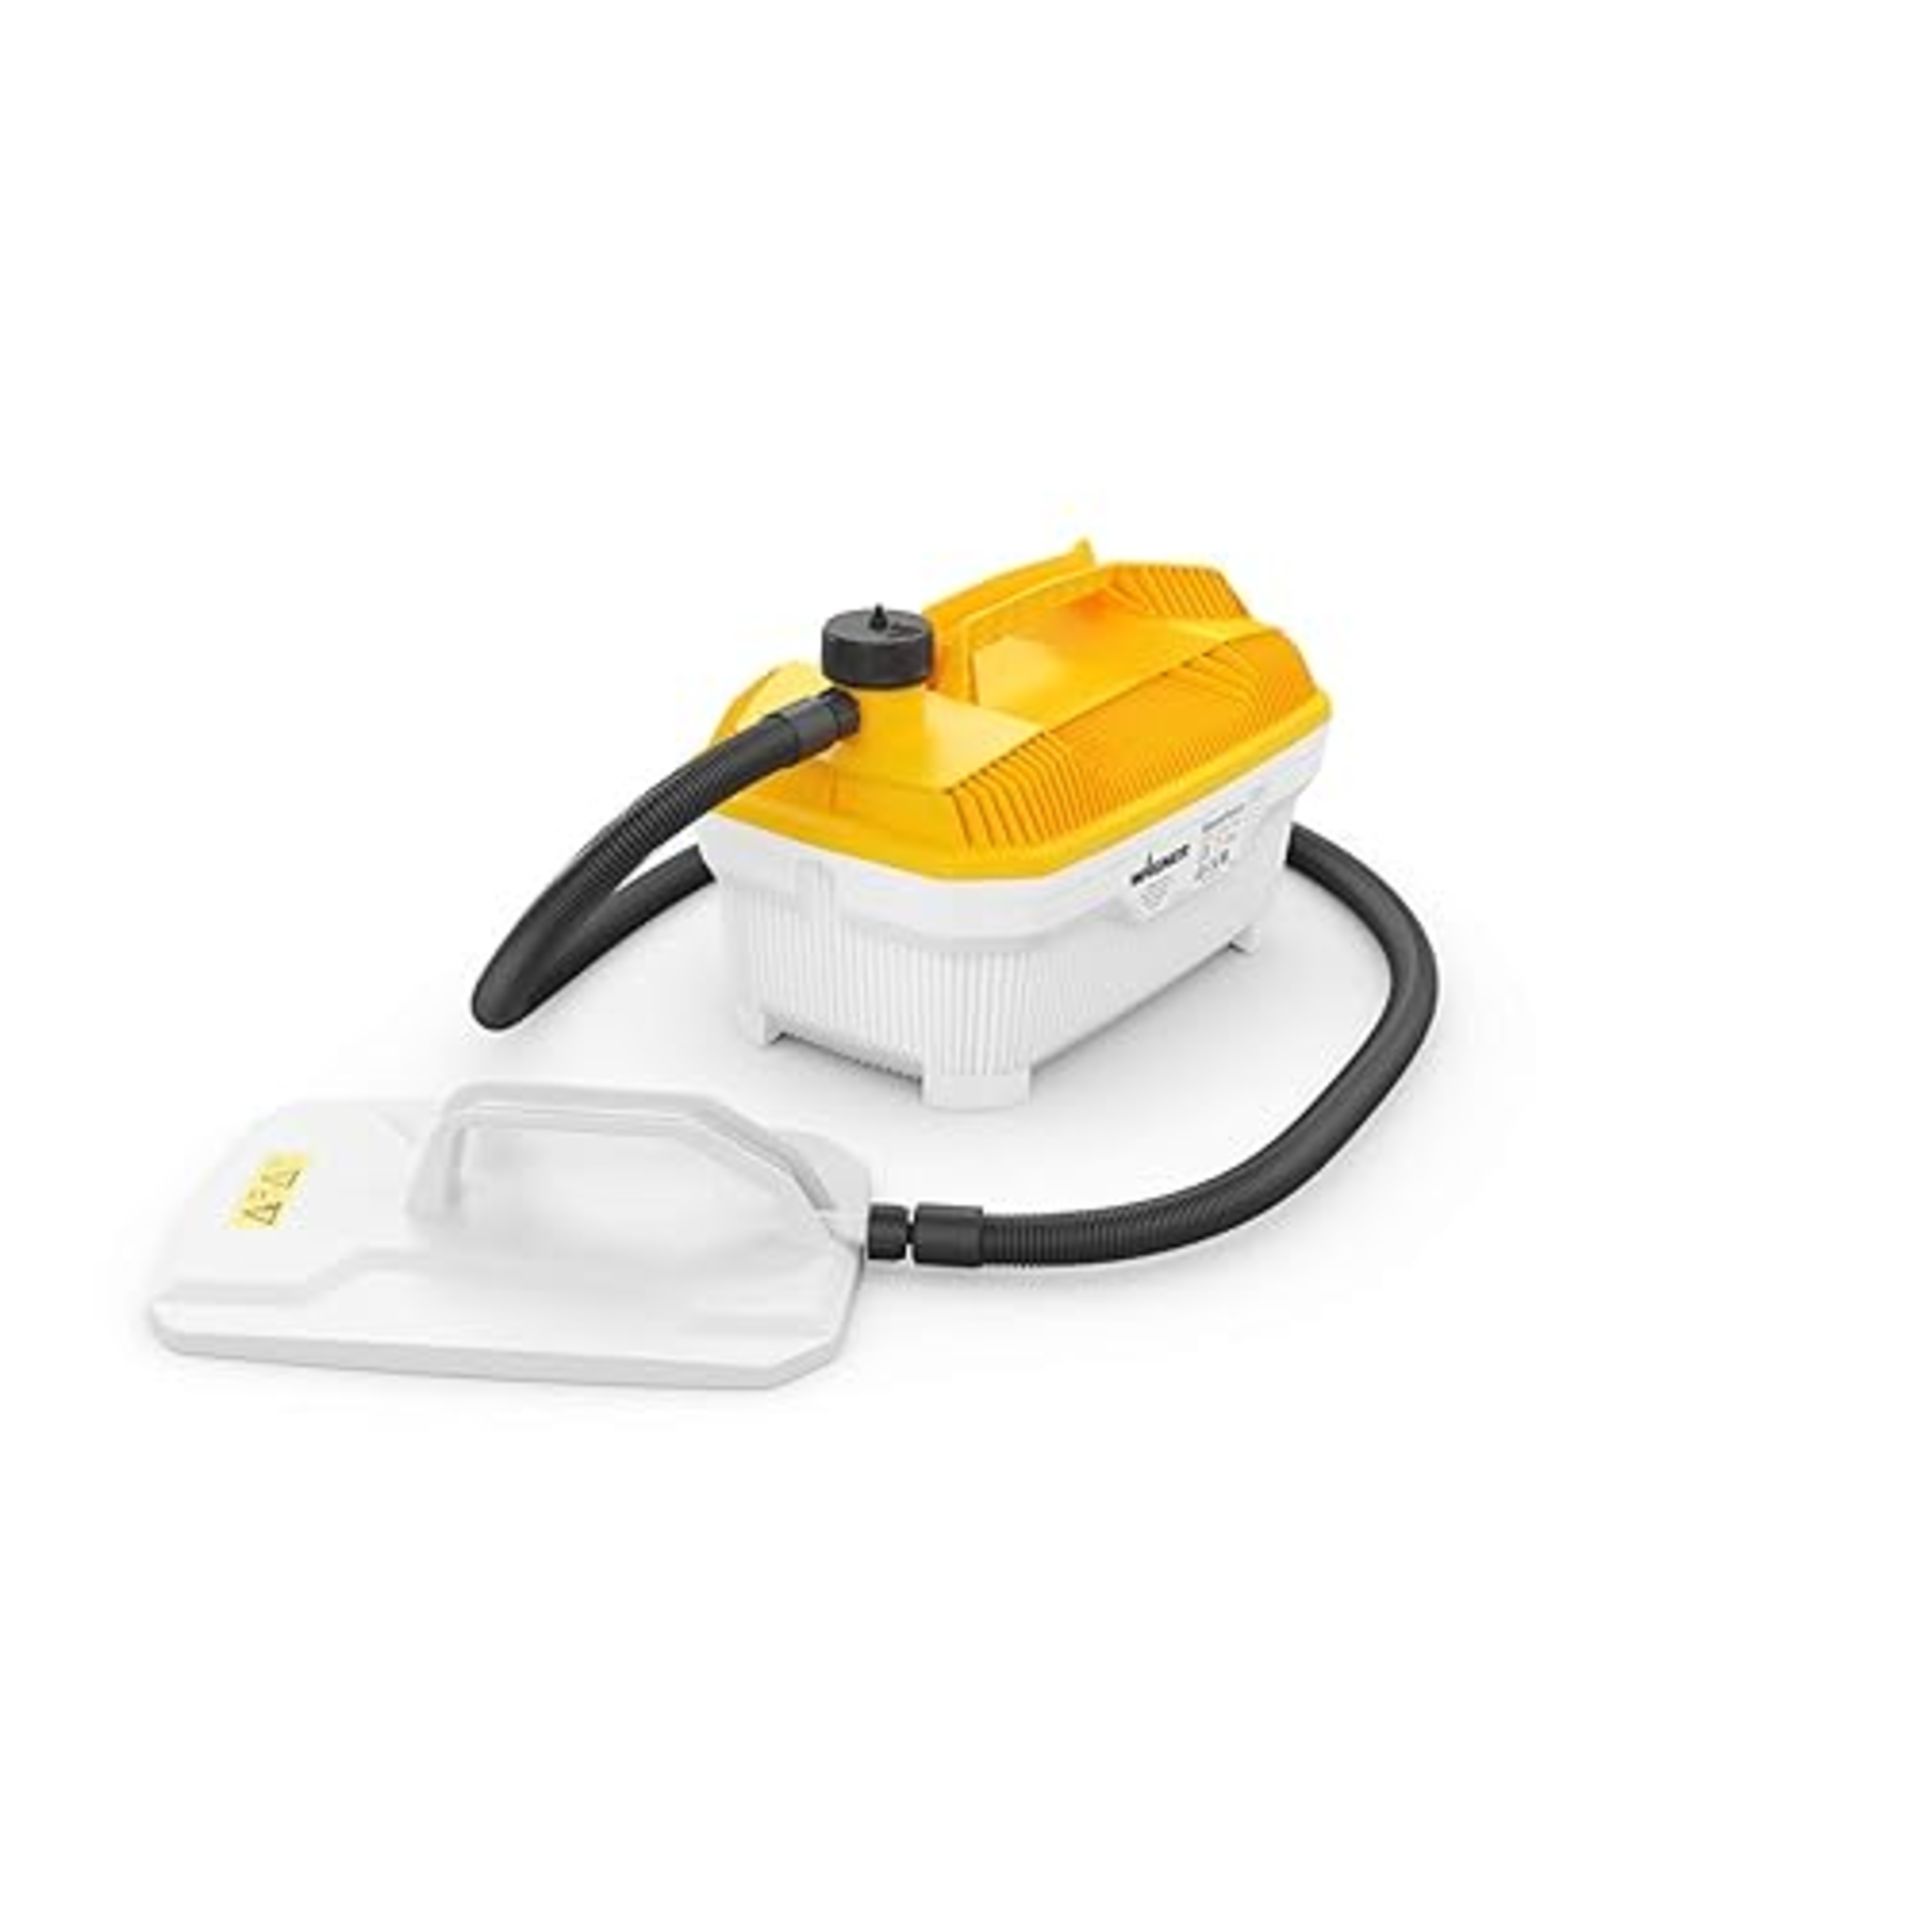 Wagner Steam Wallpaper Stripper Steamforce, 4 L Capacity, Steaming Time Max. 70 Min, 3,7 M Hose,...